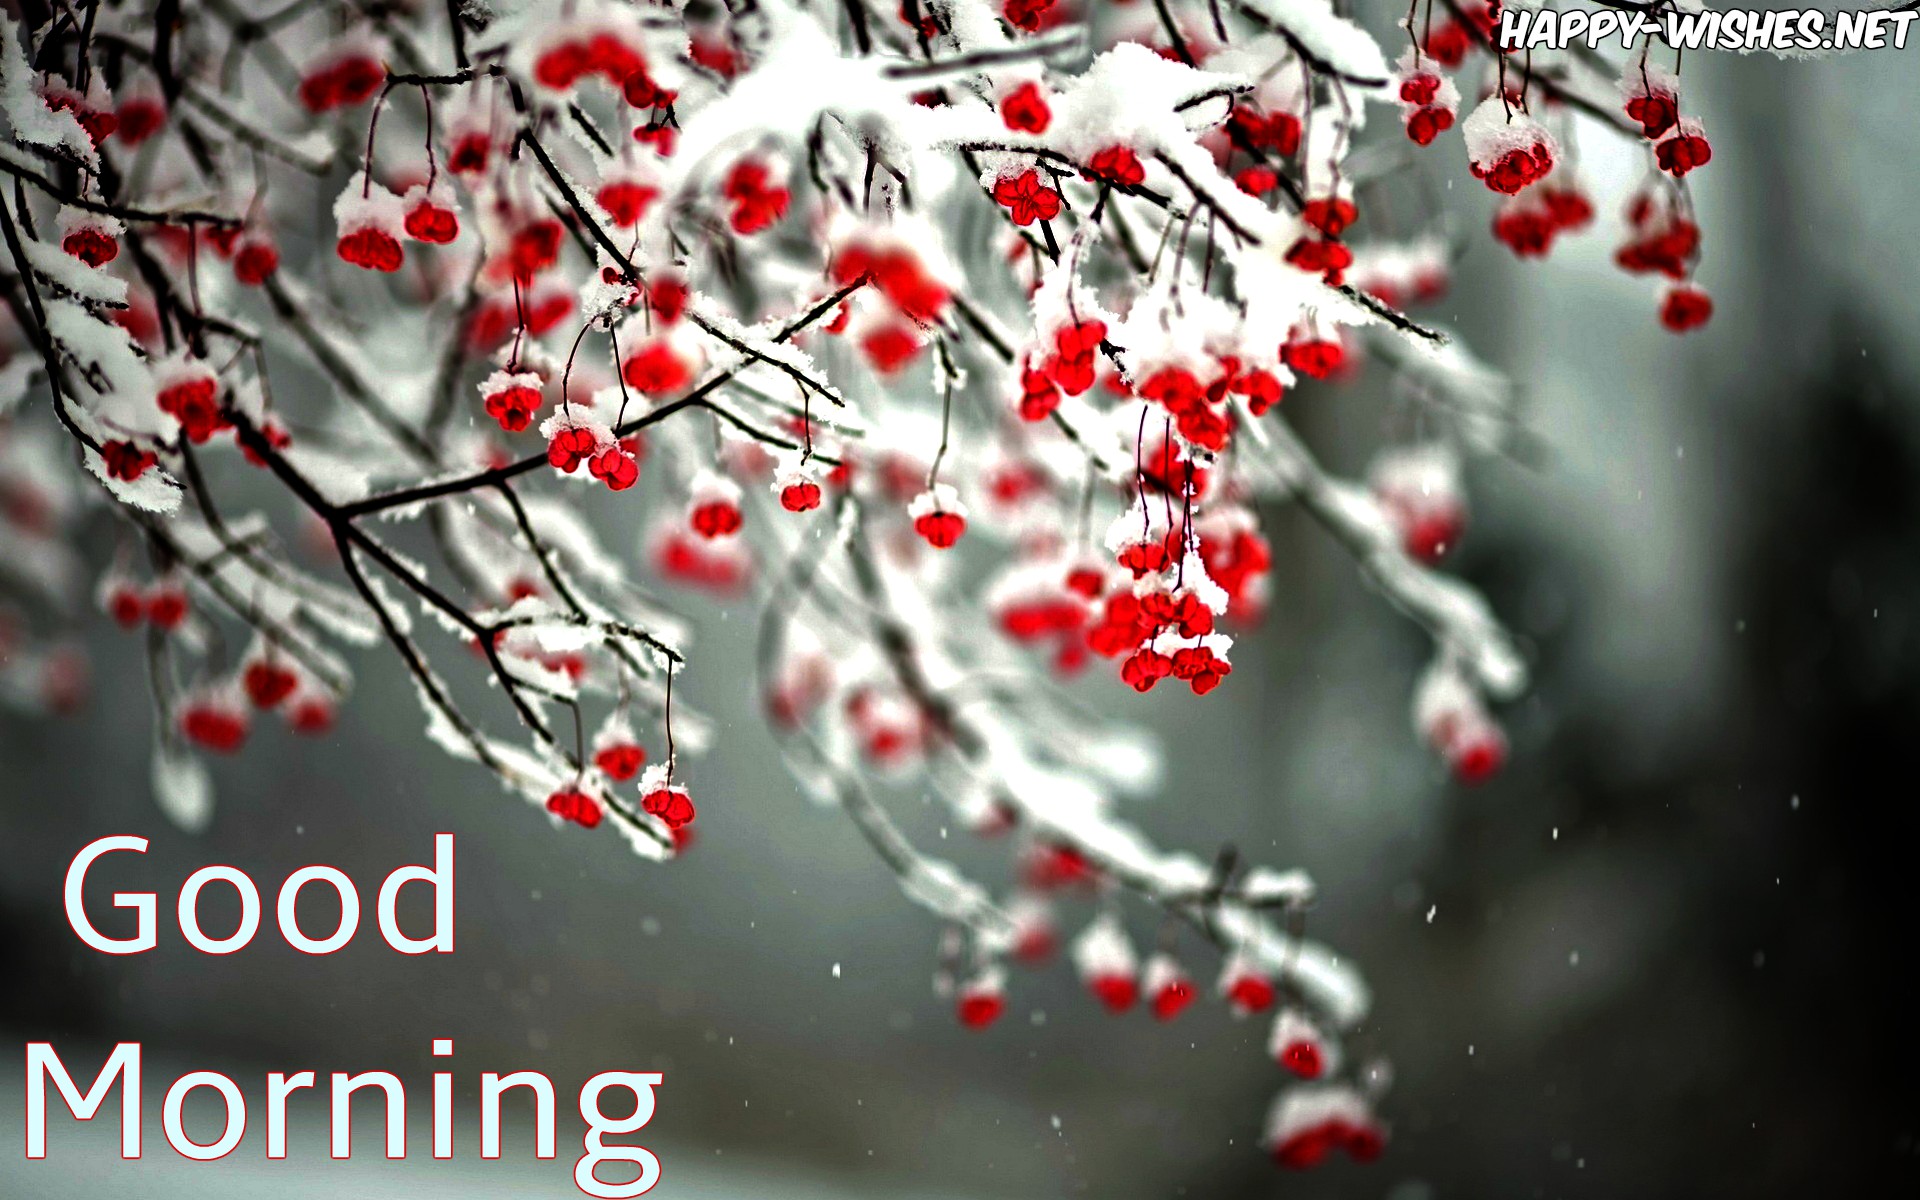 Good Morning Winter Images with Snow On TreeGood Morning Winter Images...